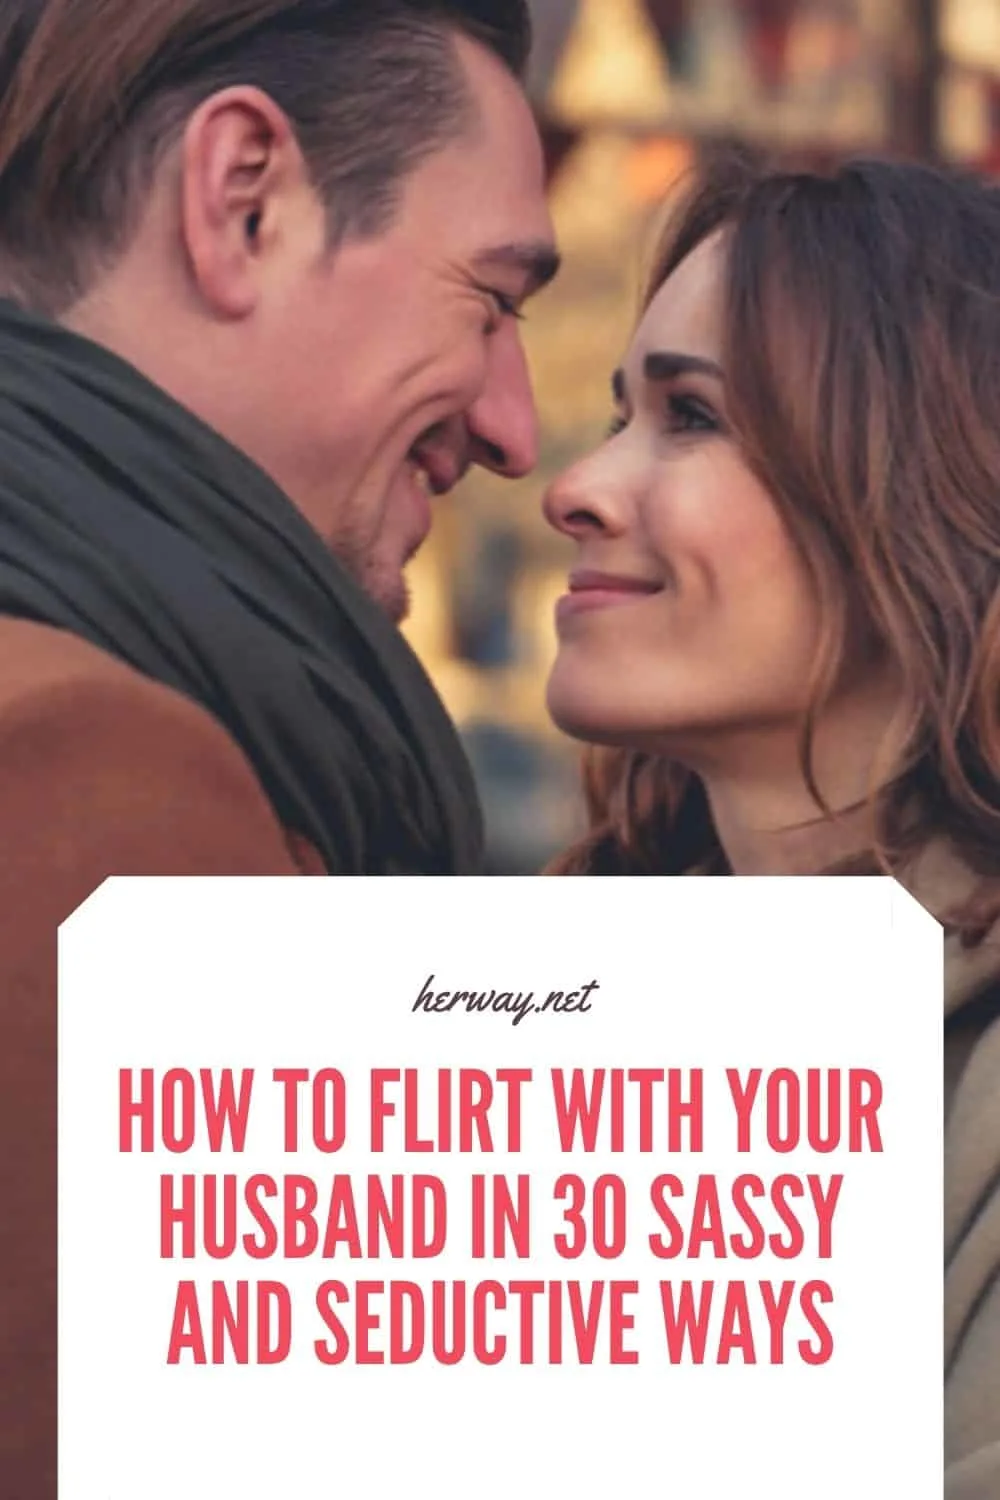 How To Flirt With Your Husband In 30 Sassy And Seductive Ways